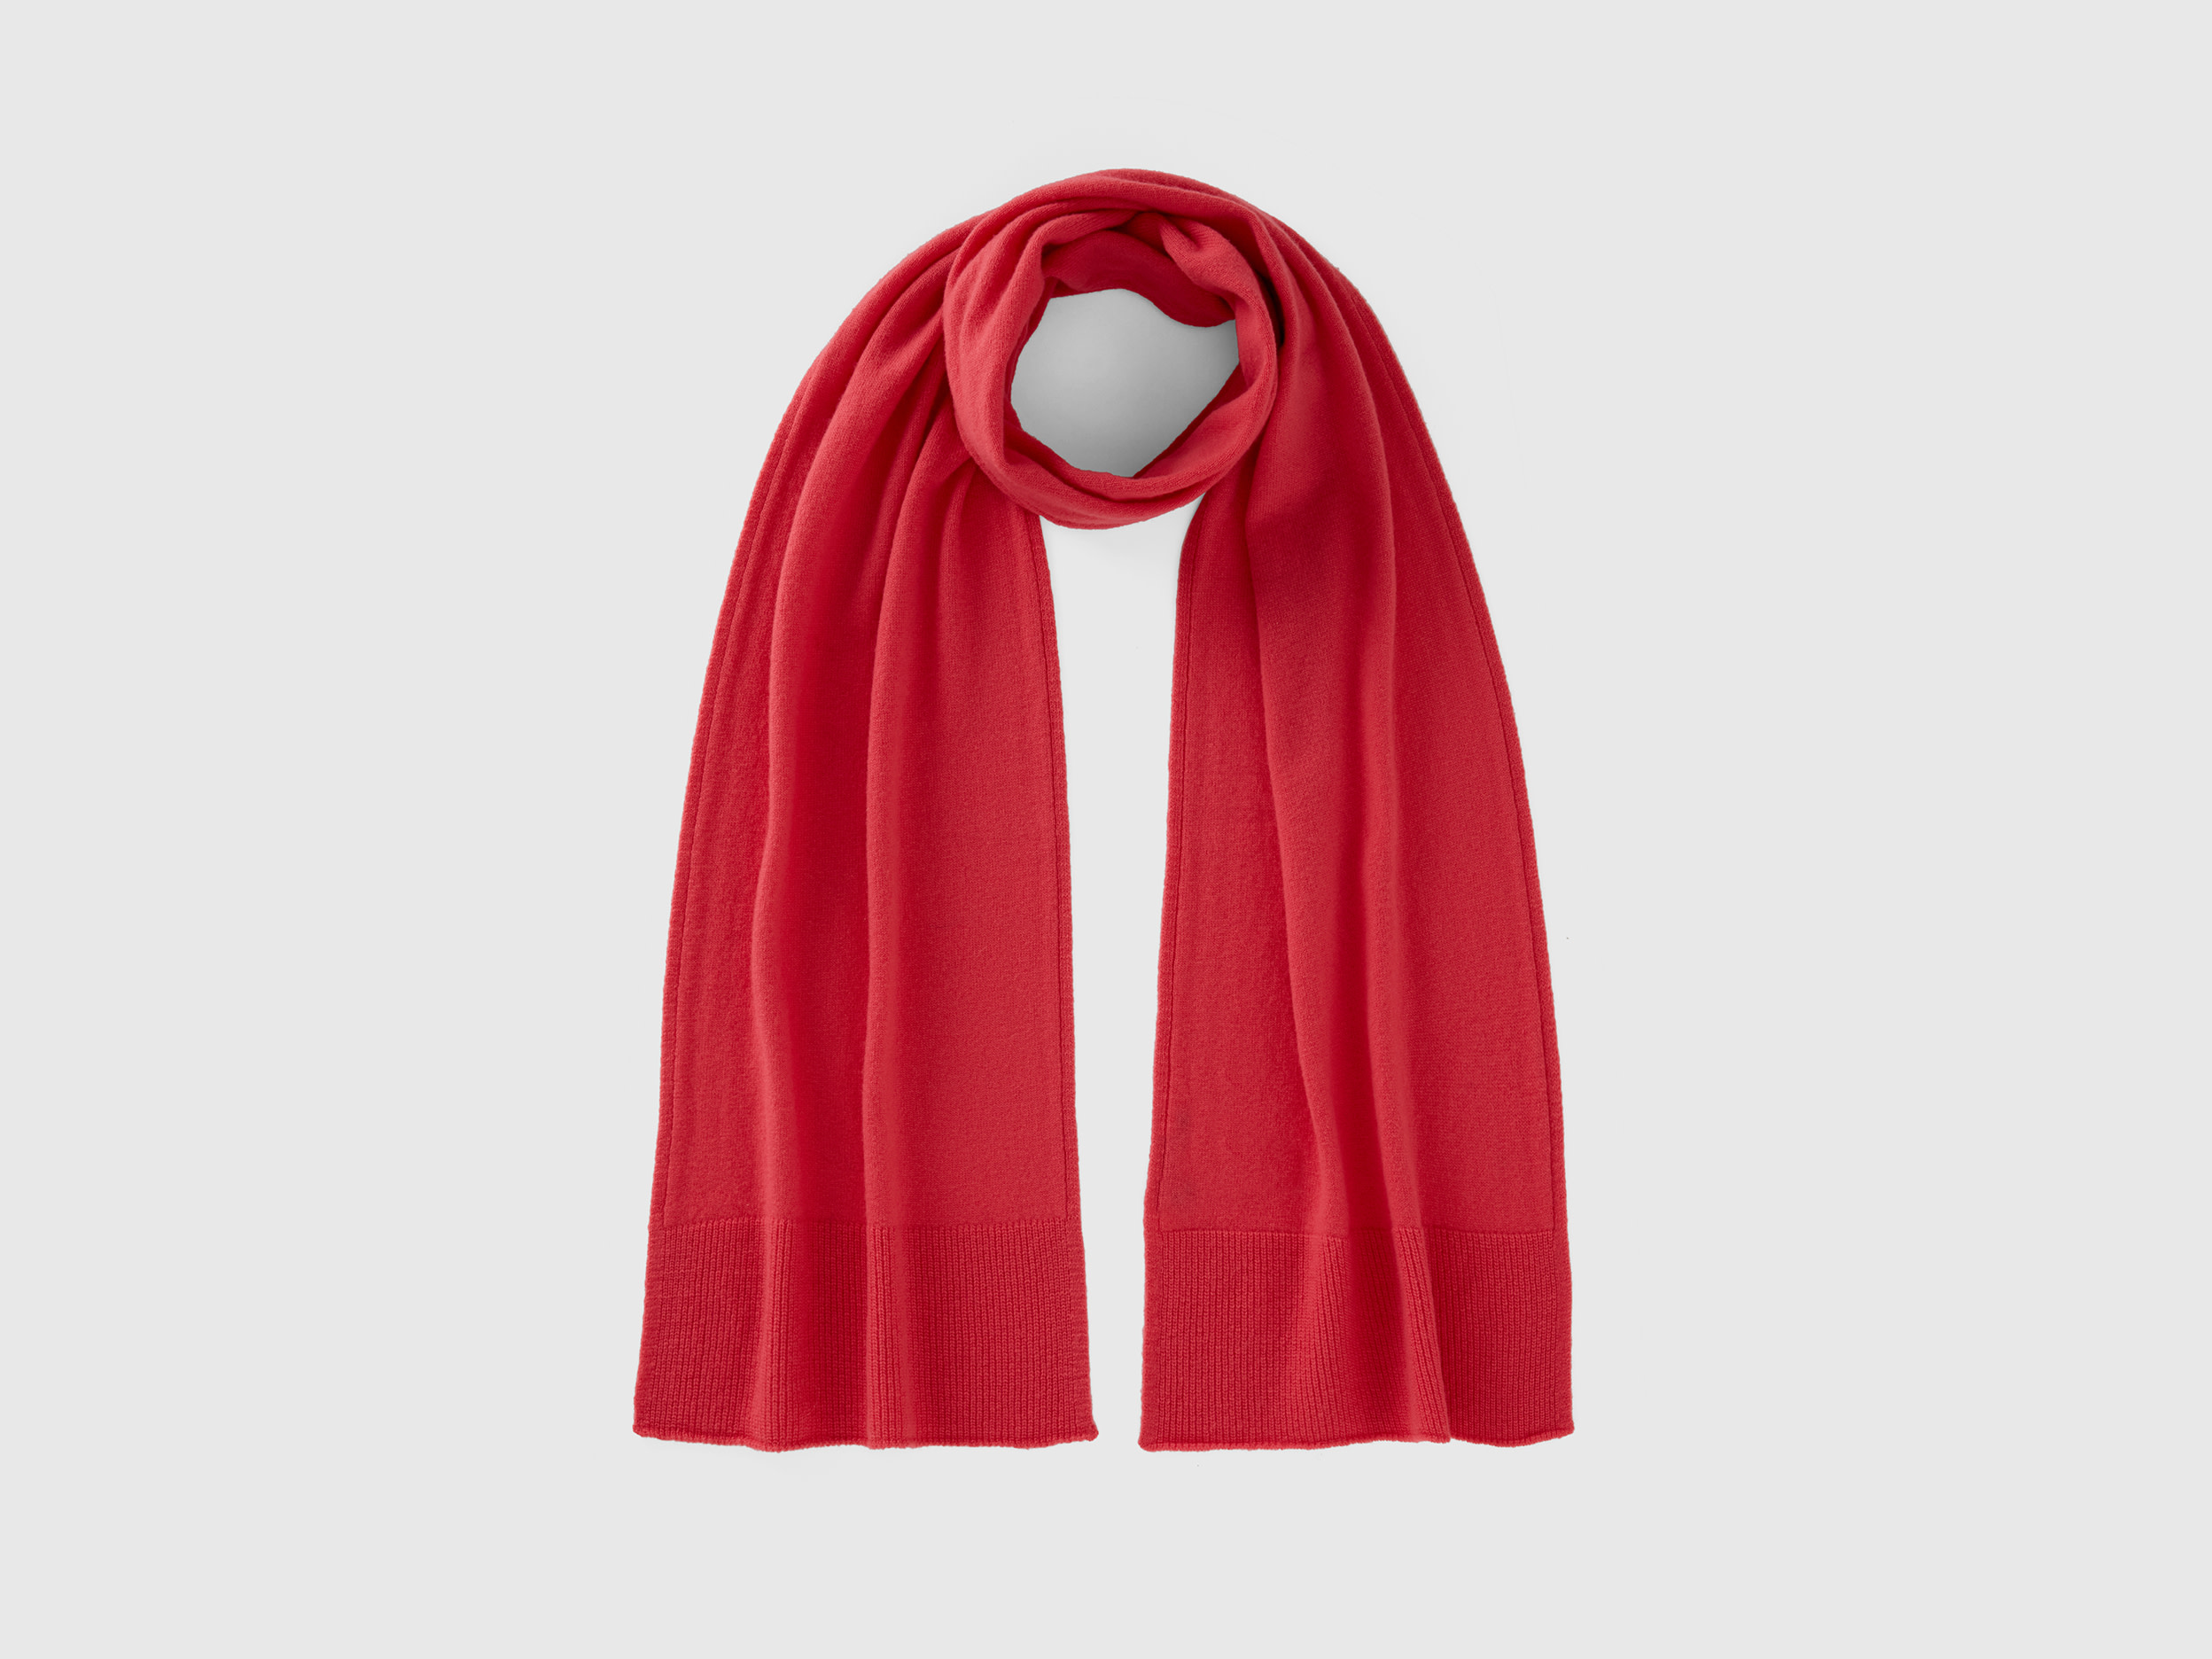 Benetton, Strawberry Red Scarf In Pure Merino Wool, size OS, Strawberry, Women